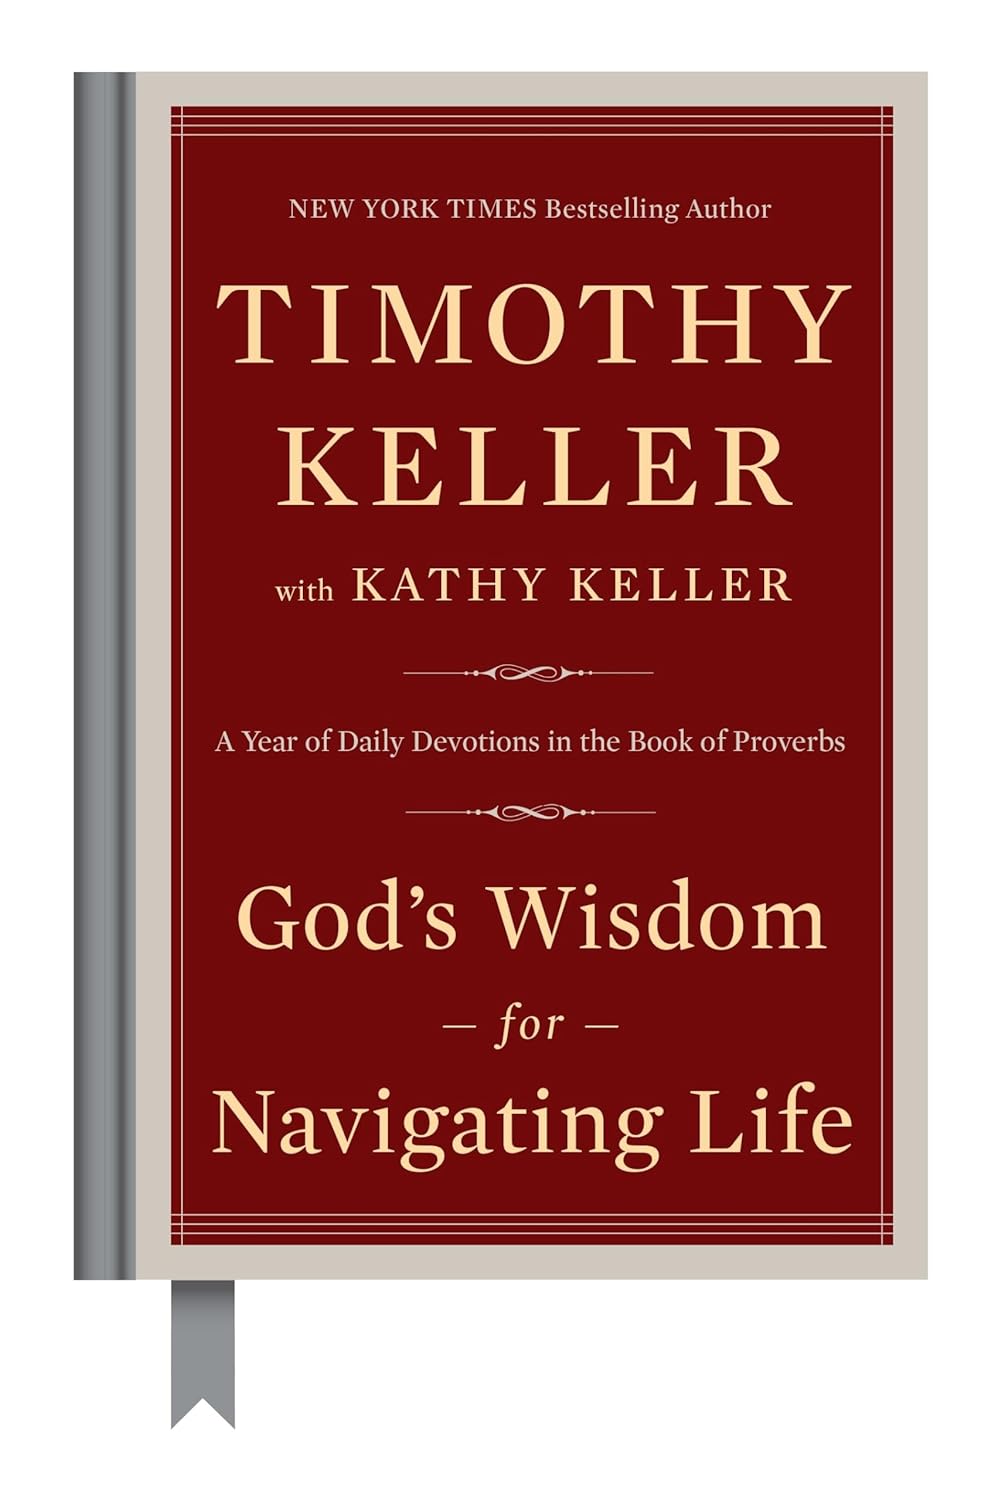 God's Wisdom for Navigating Life : A Year of Daily Devotions in the Book of Proverbs by Timothy Keller